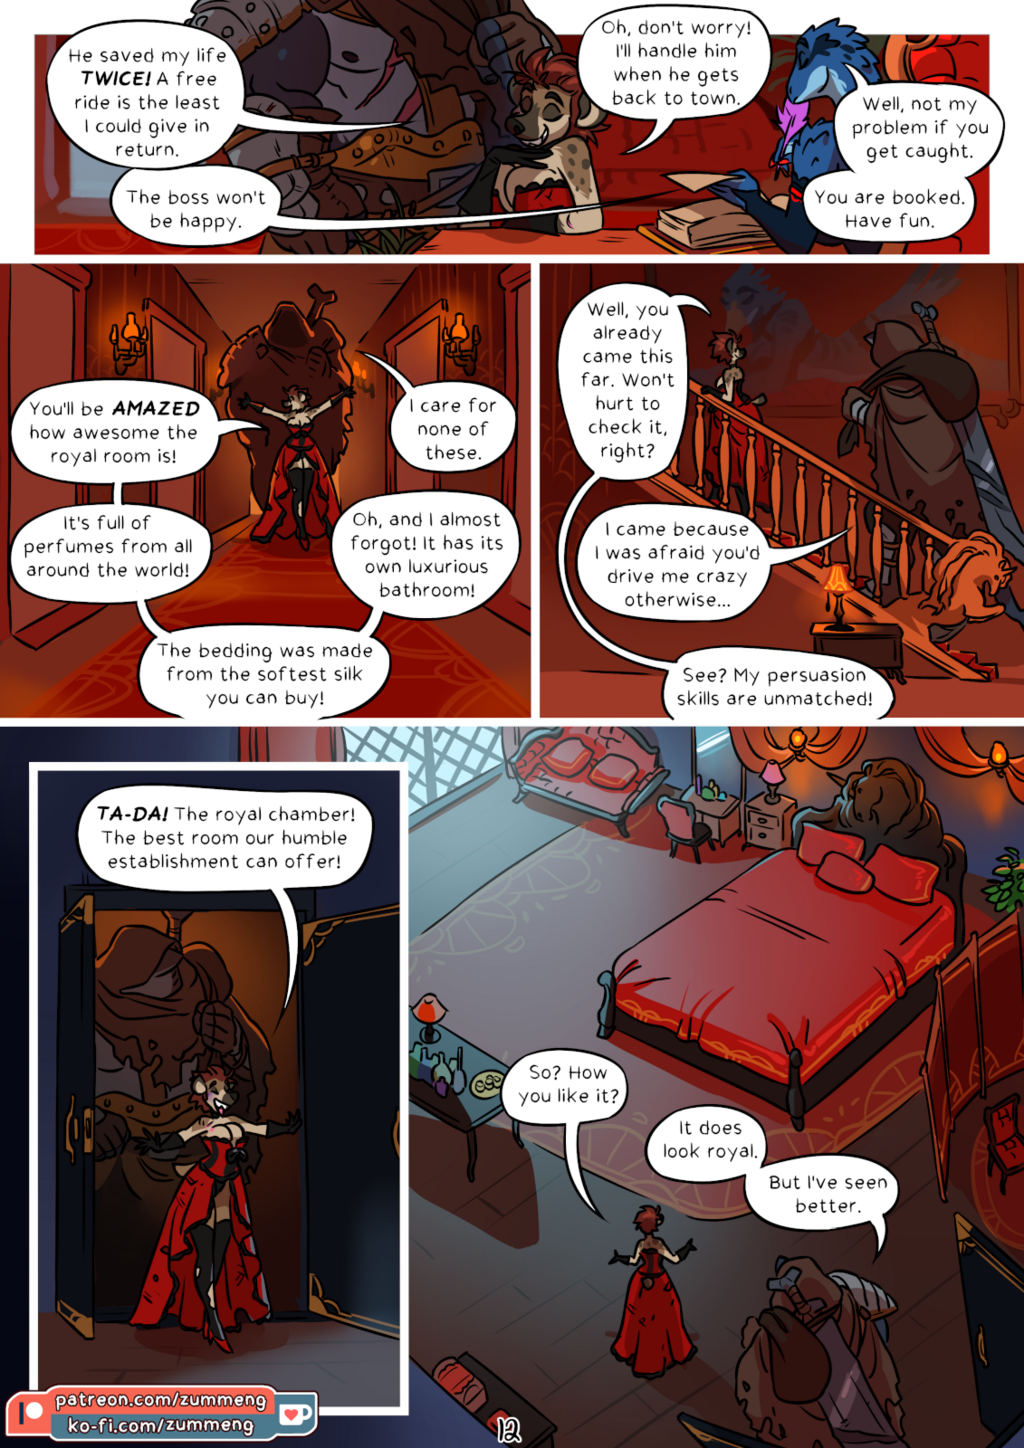 Perfect Fit pg. 12.